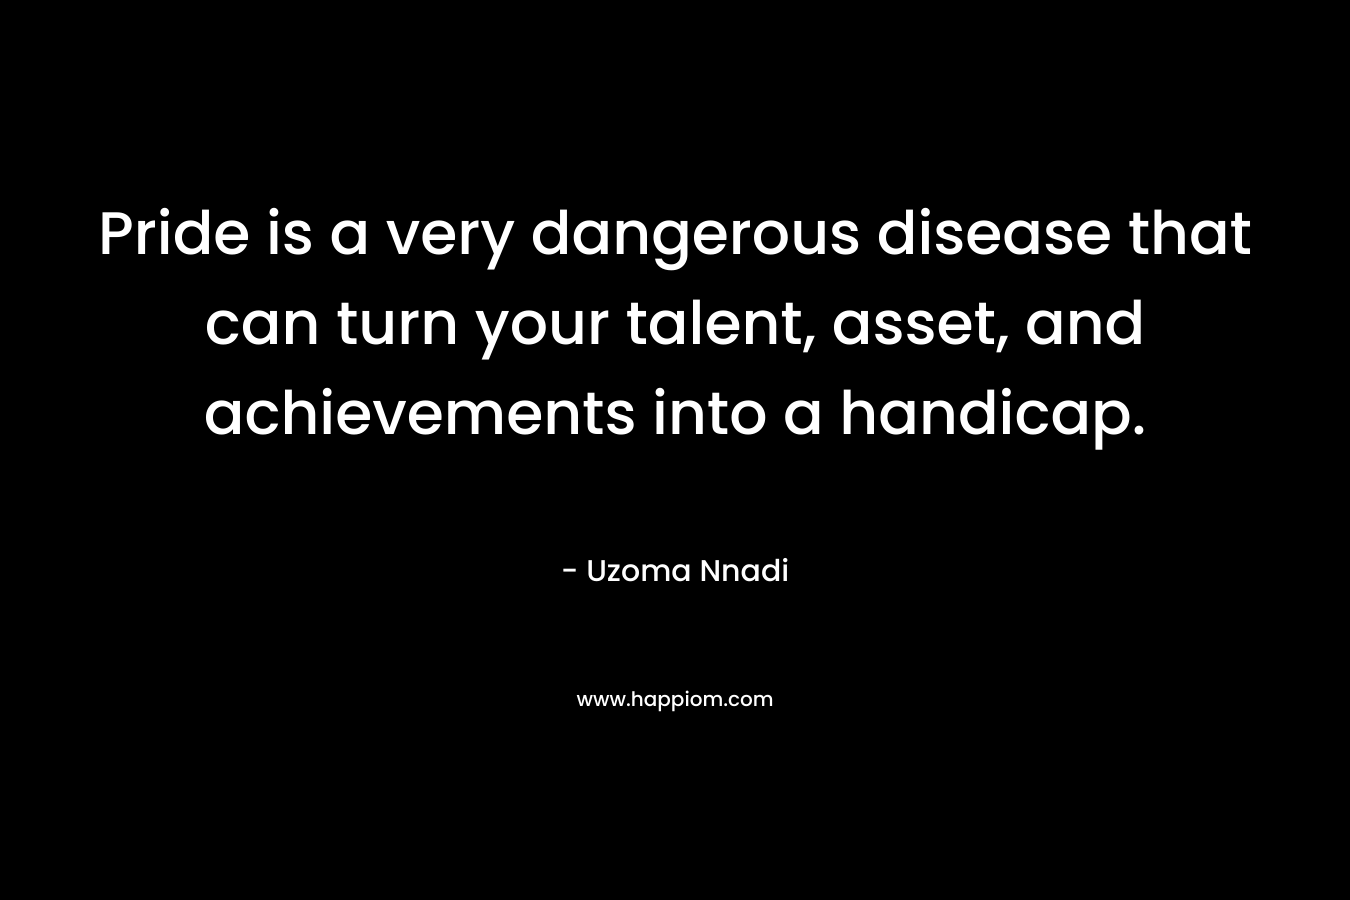 Pride is a very dangerous disease that can turn your talent, asset, and achievements into a handicap. – Uzoma Nnadi